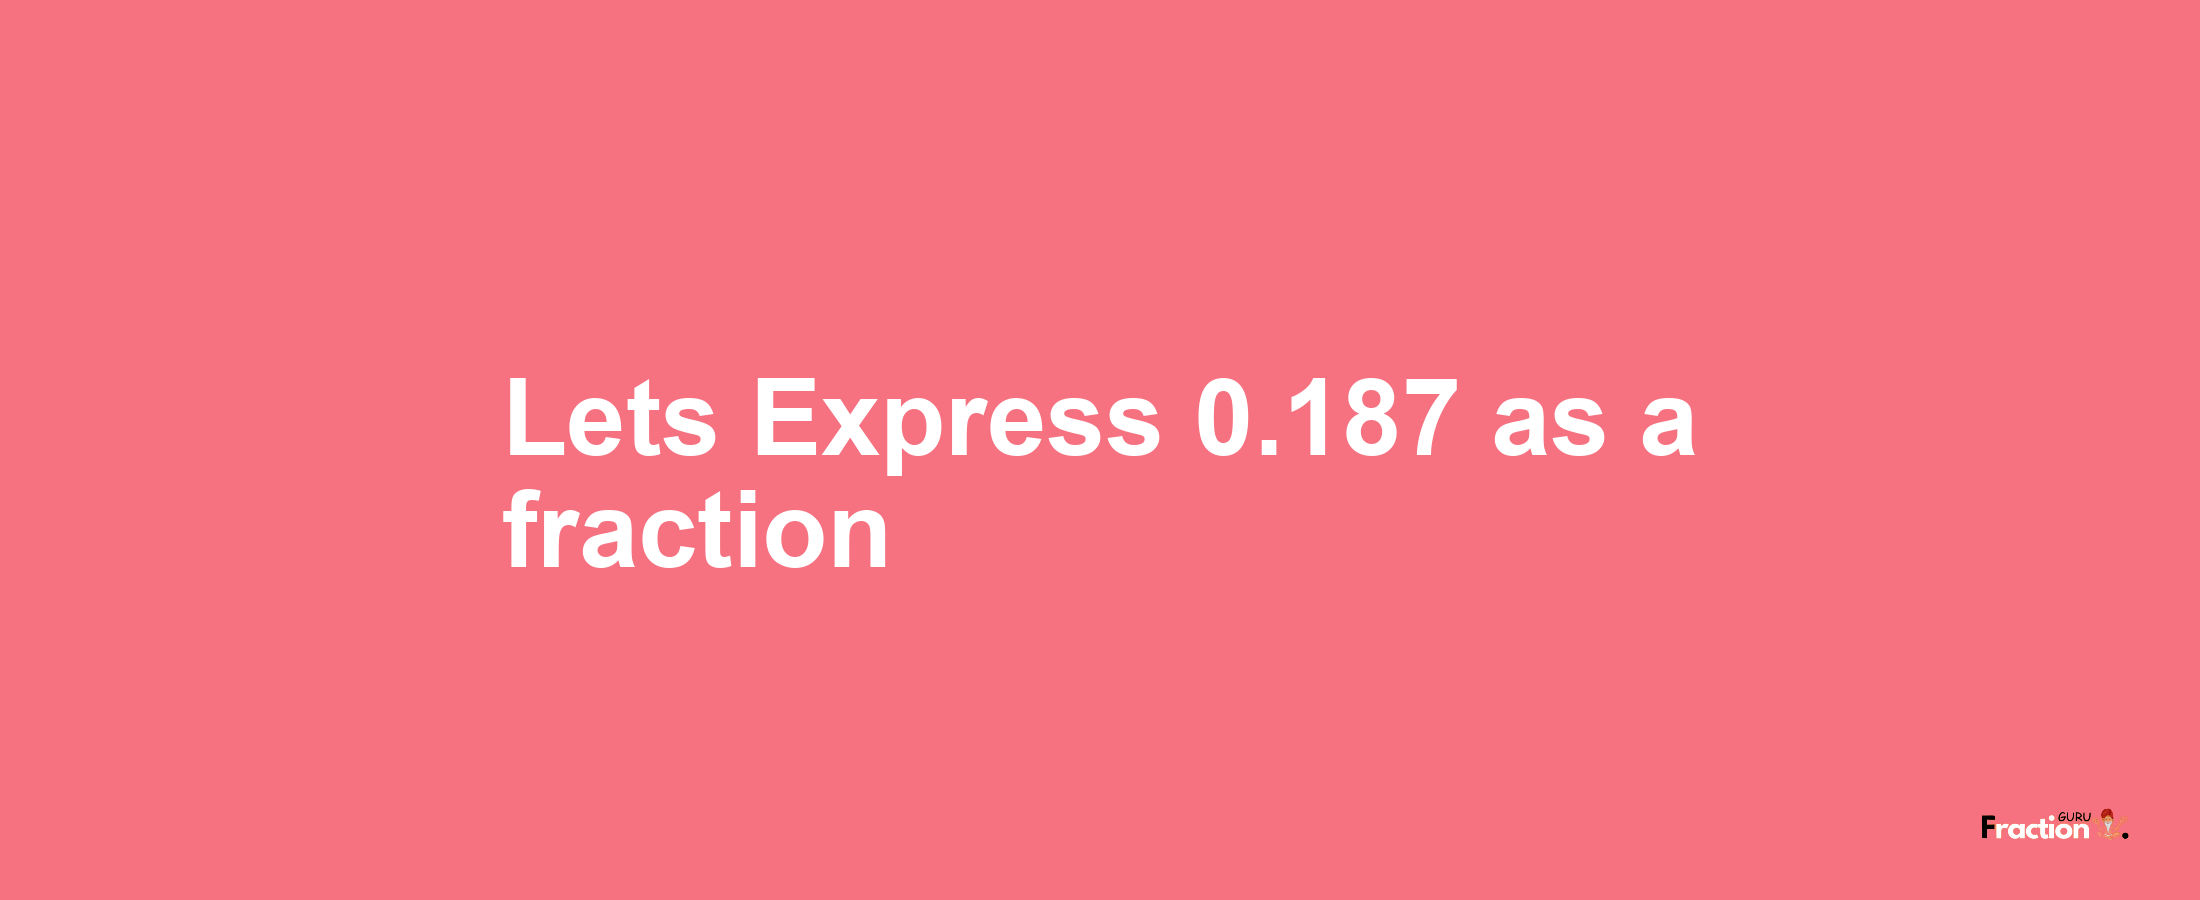 Lets Express 0.187 as afraction